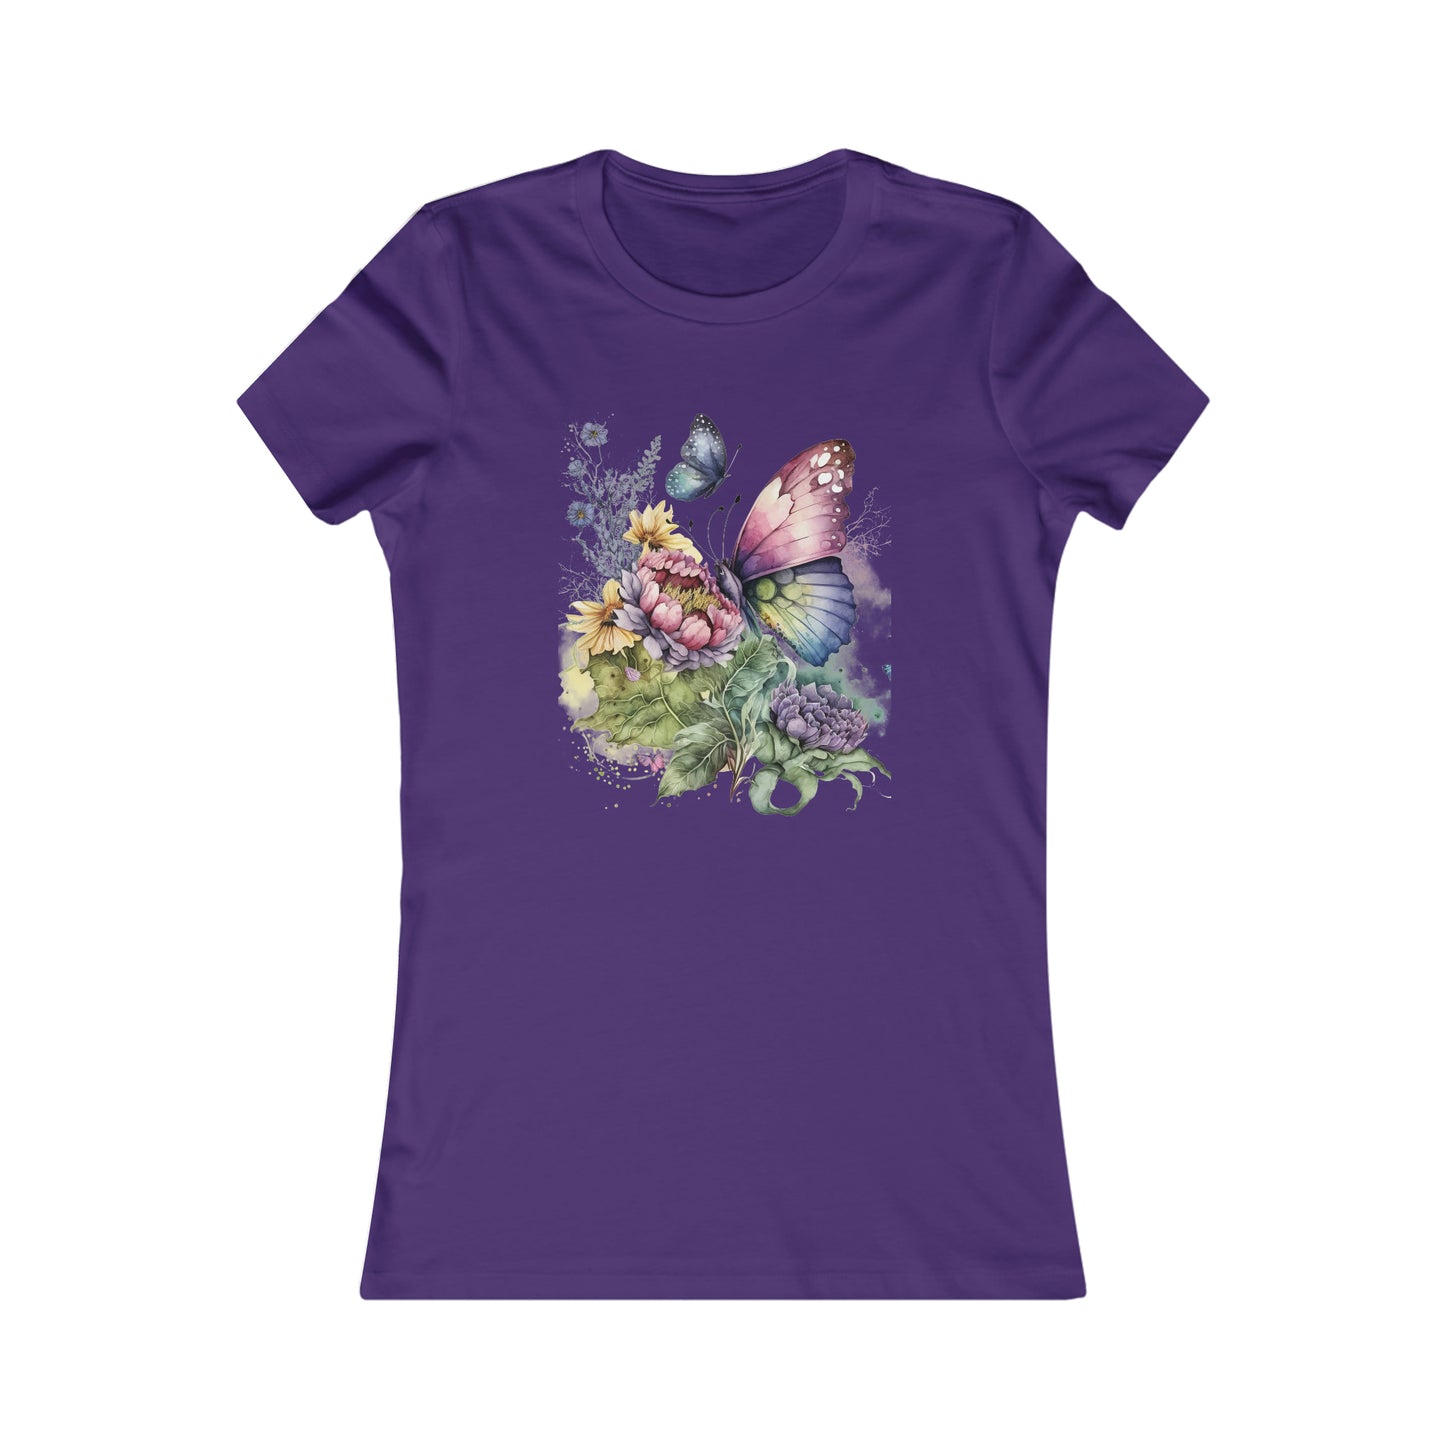 Express Yourself with Our Women's Butterfly Flowers T-Shirt - The Perfect Gift for Fashion-Forward Women and Girls